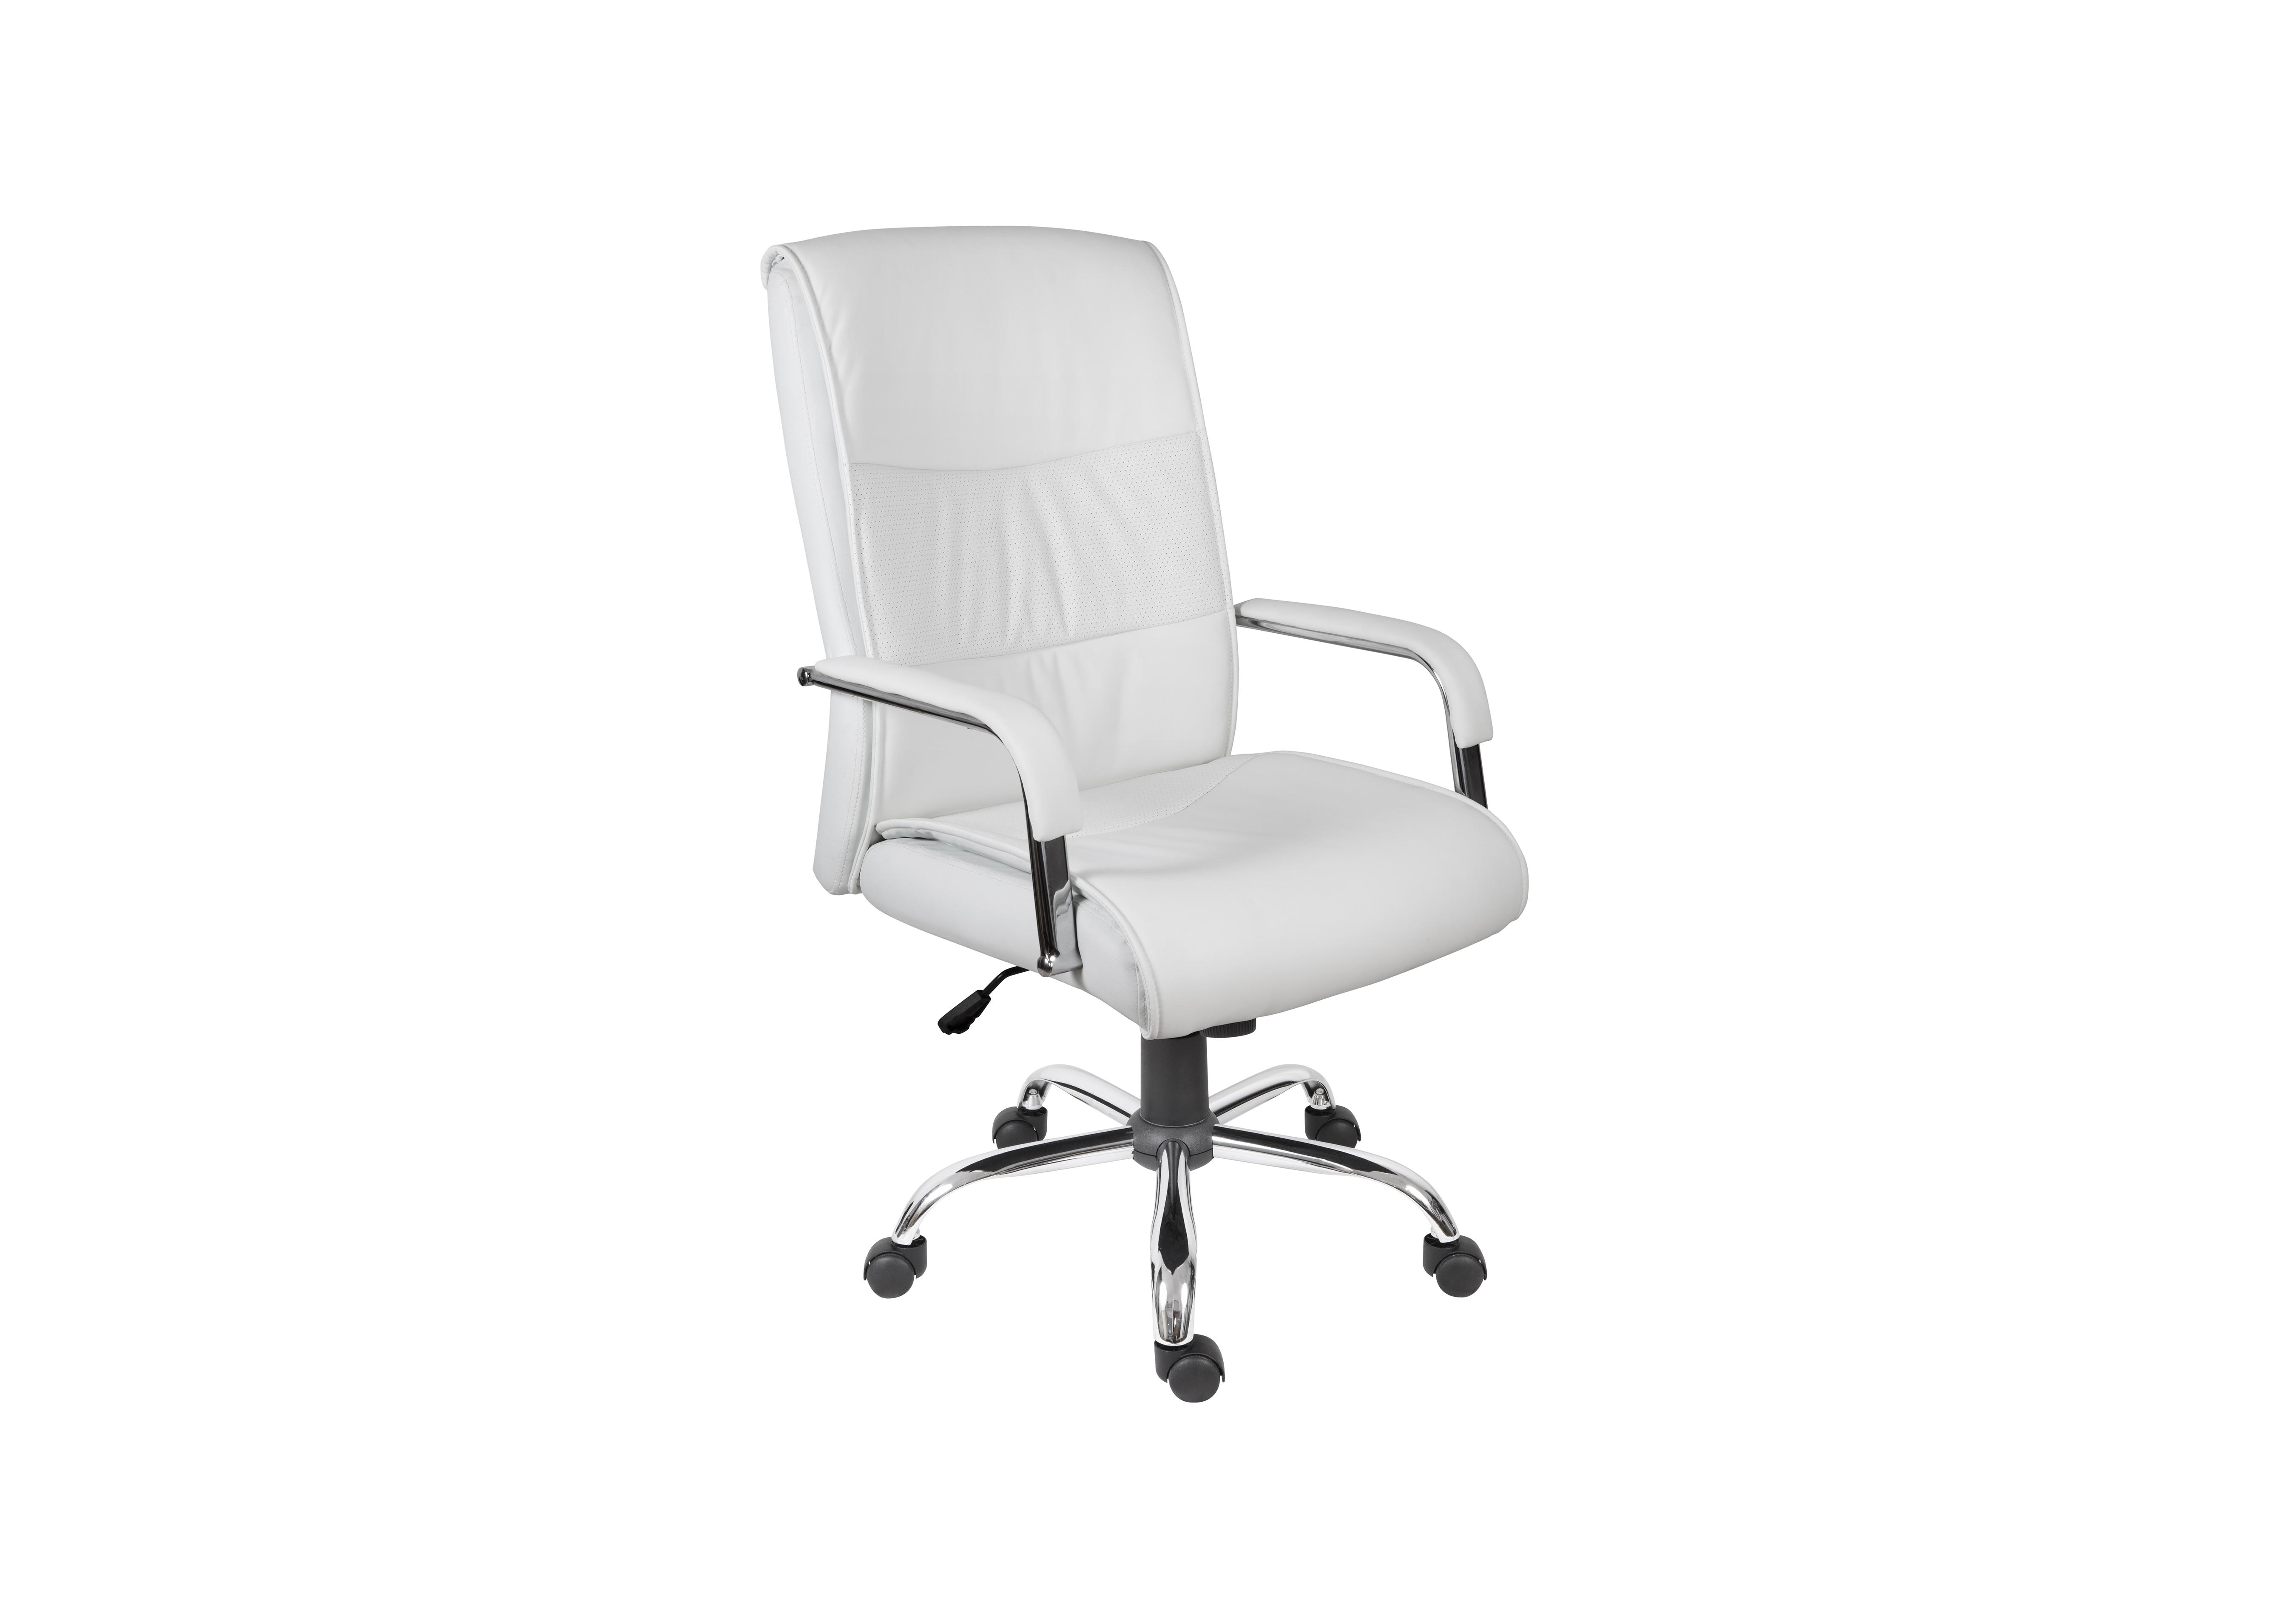 East River Pier 16 Office Chair in White on Furniture Village